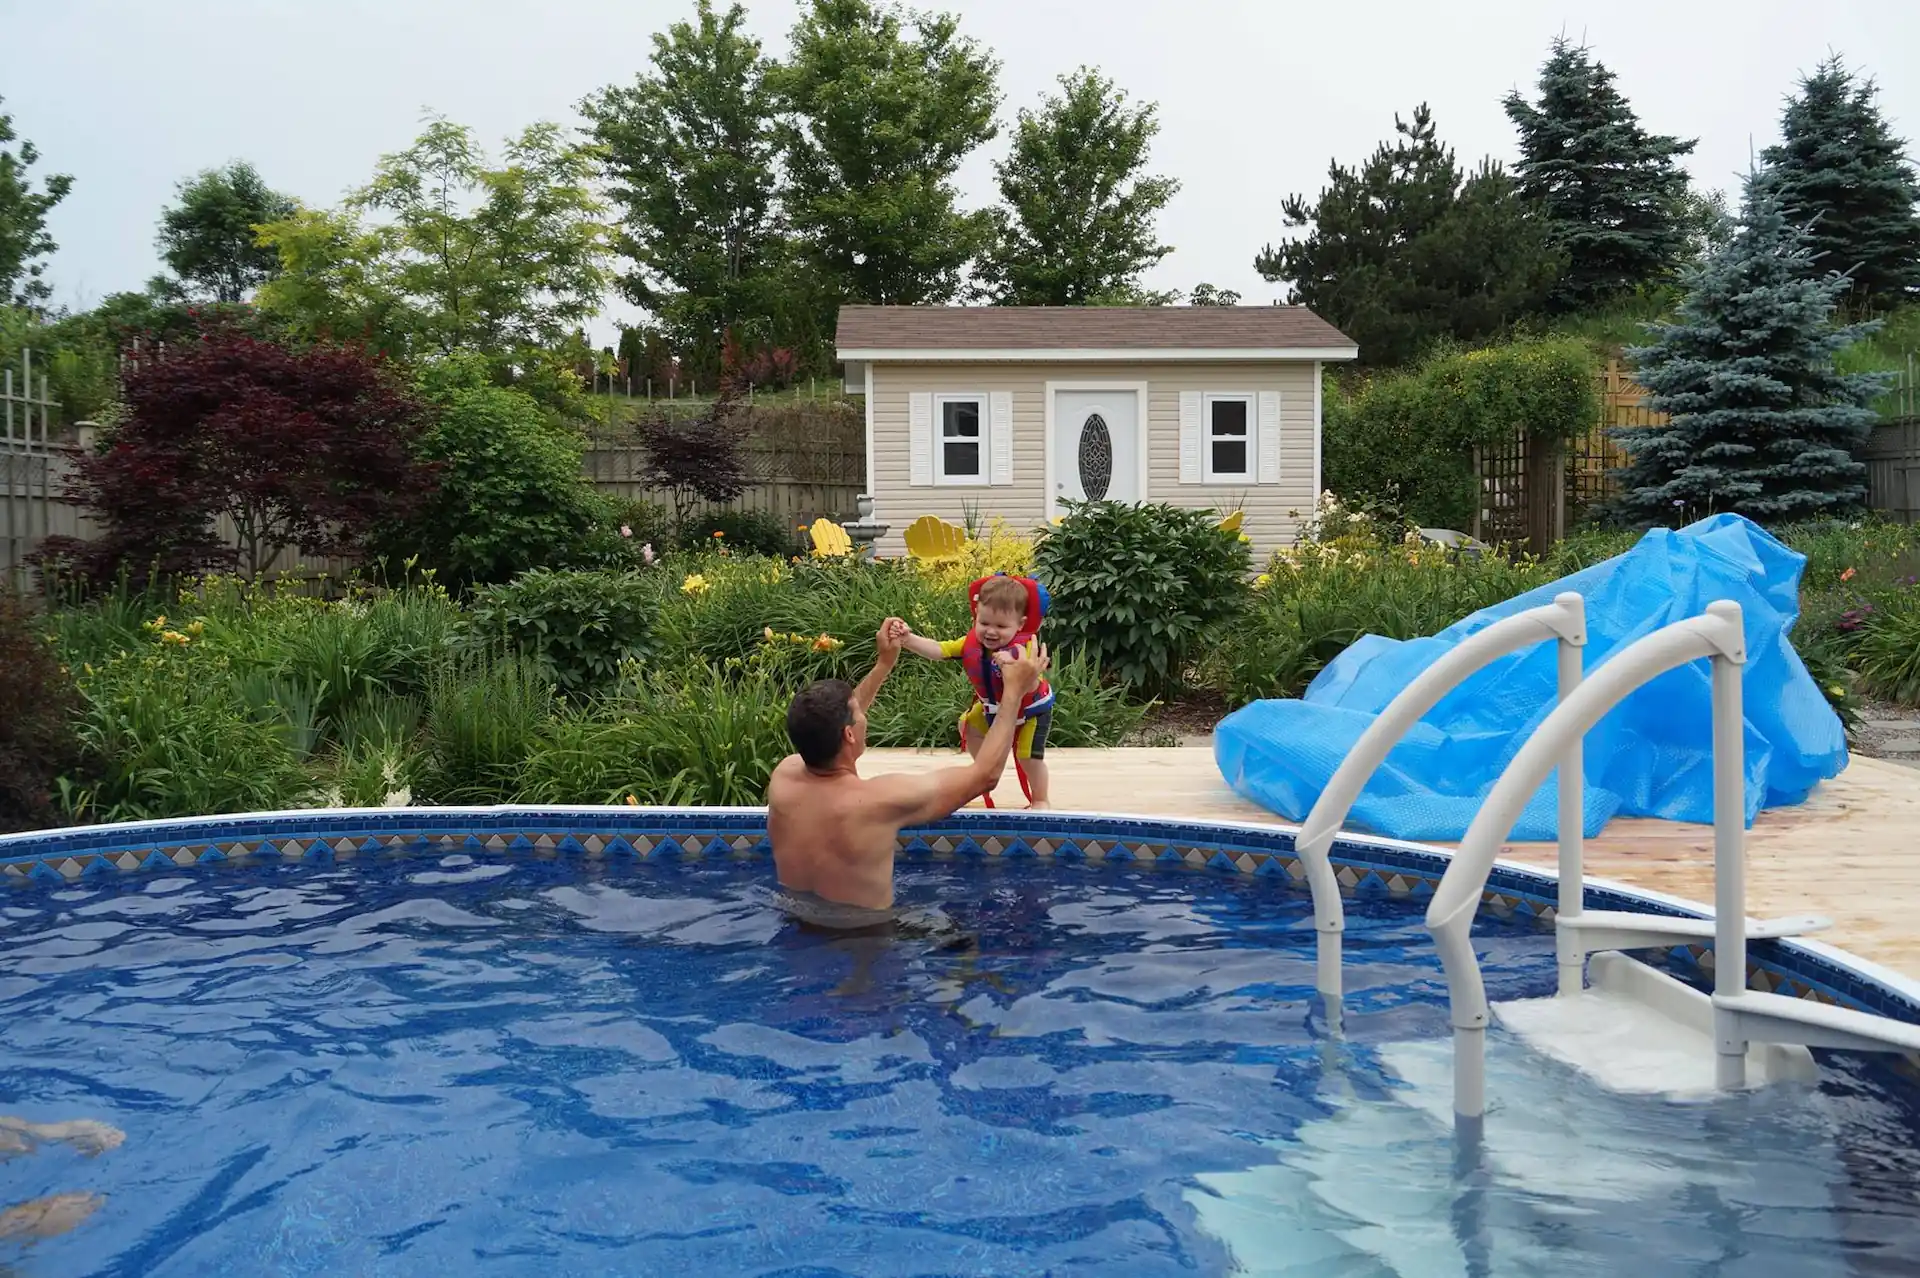 An adult swimmer helps a small child wearing floatation gear into an above ground pool.